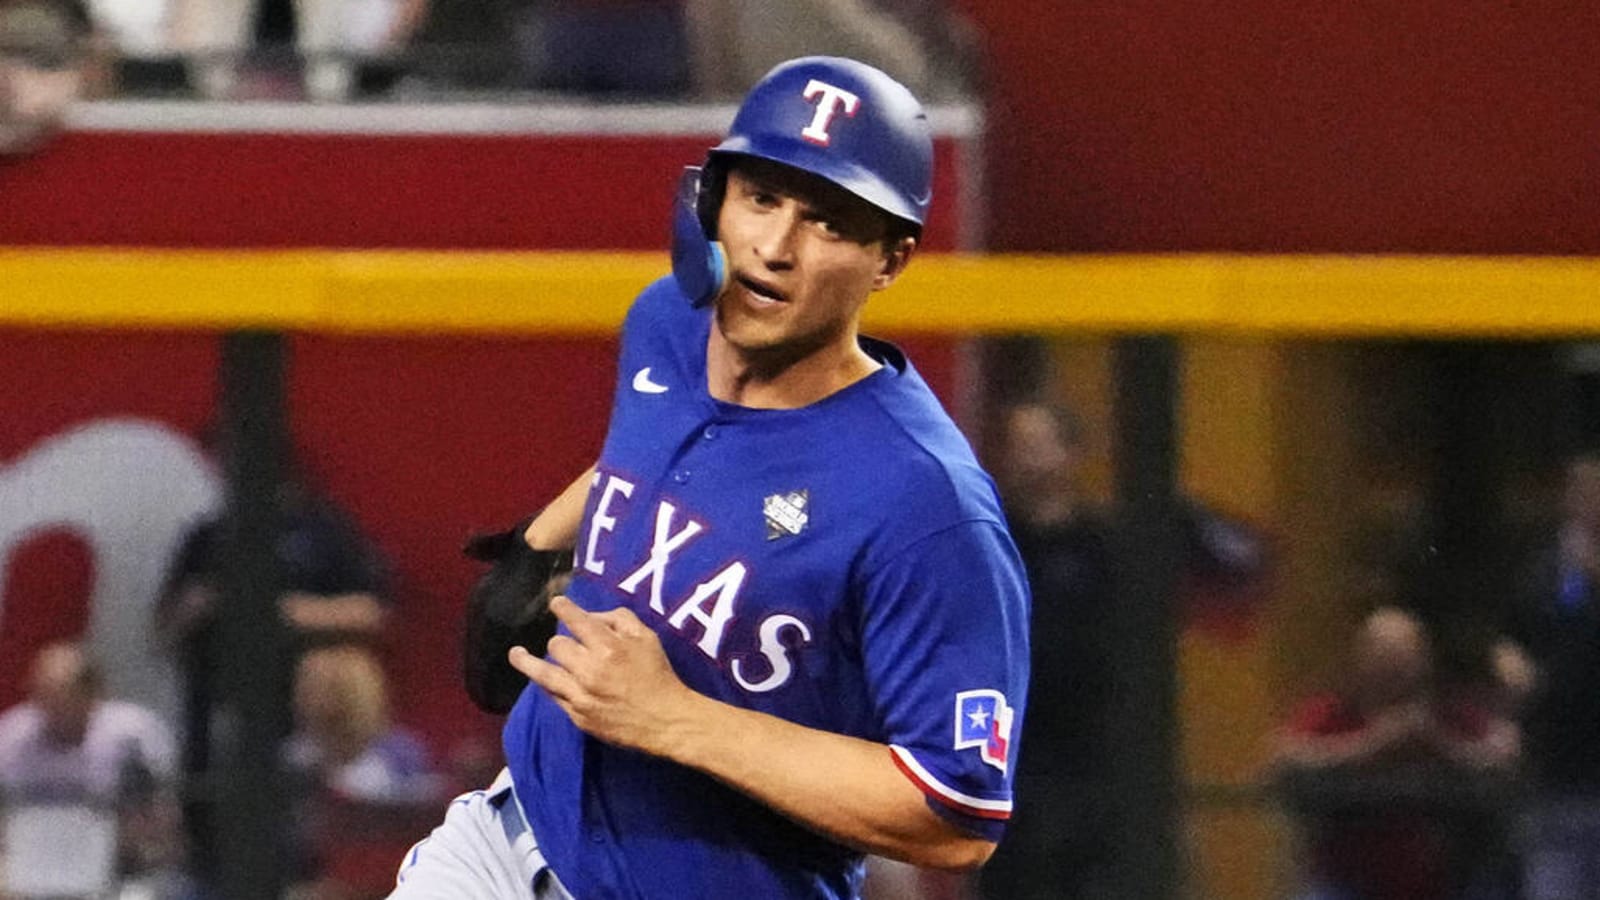 Rangers infield duo joins rare company with Silver Slugger nods